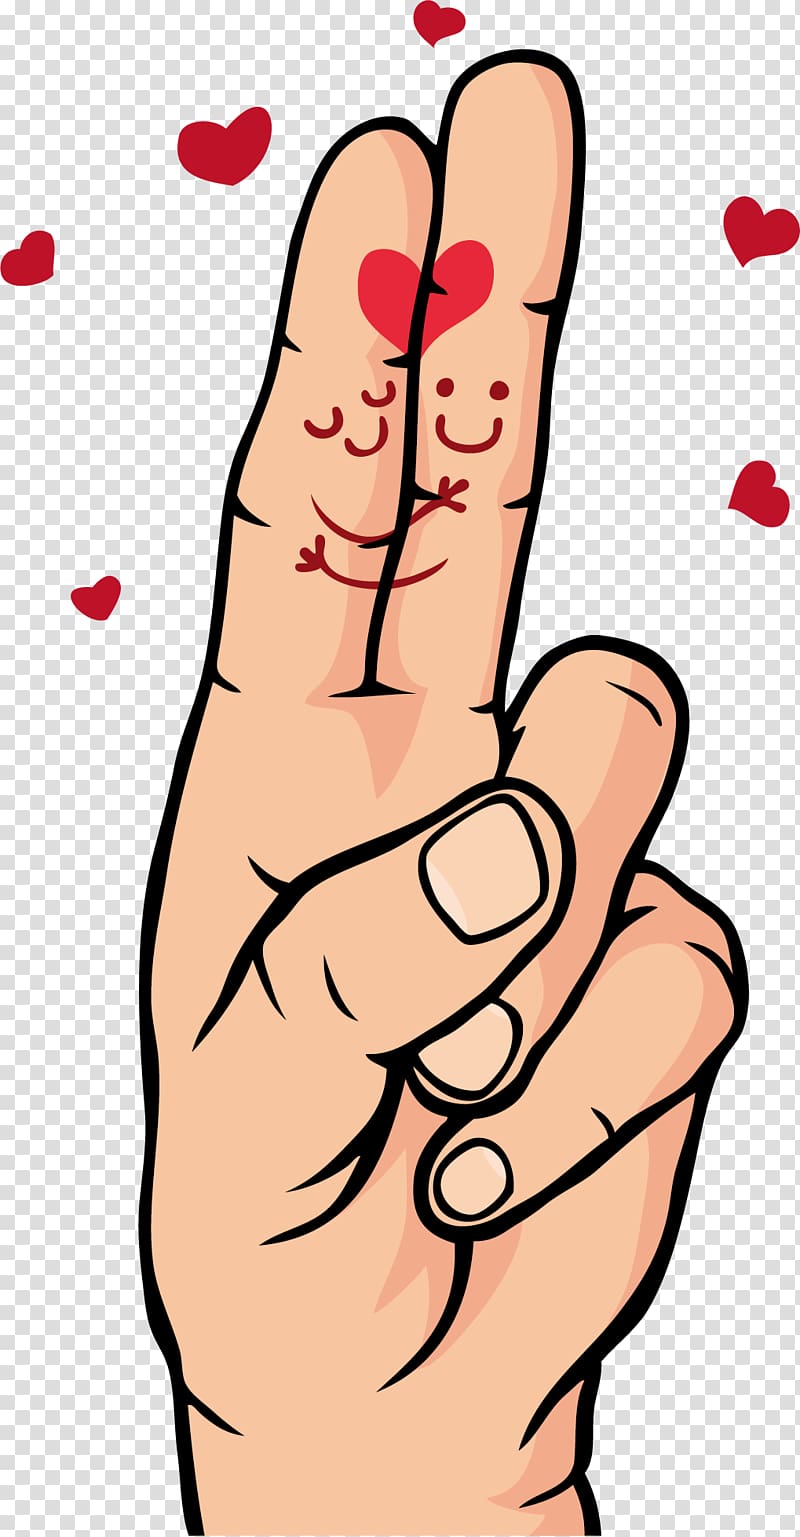 Love Thumb Heart Romance, Fingers on the fingers transparent background PNG clipart